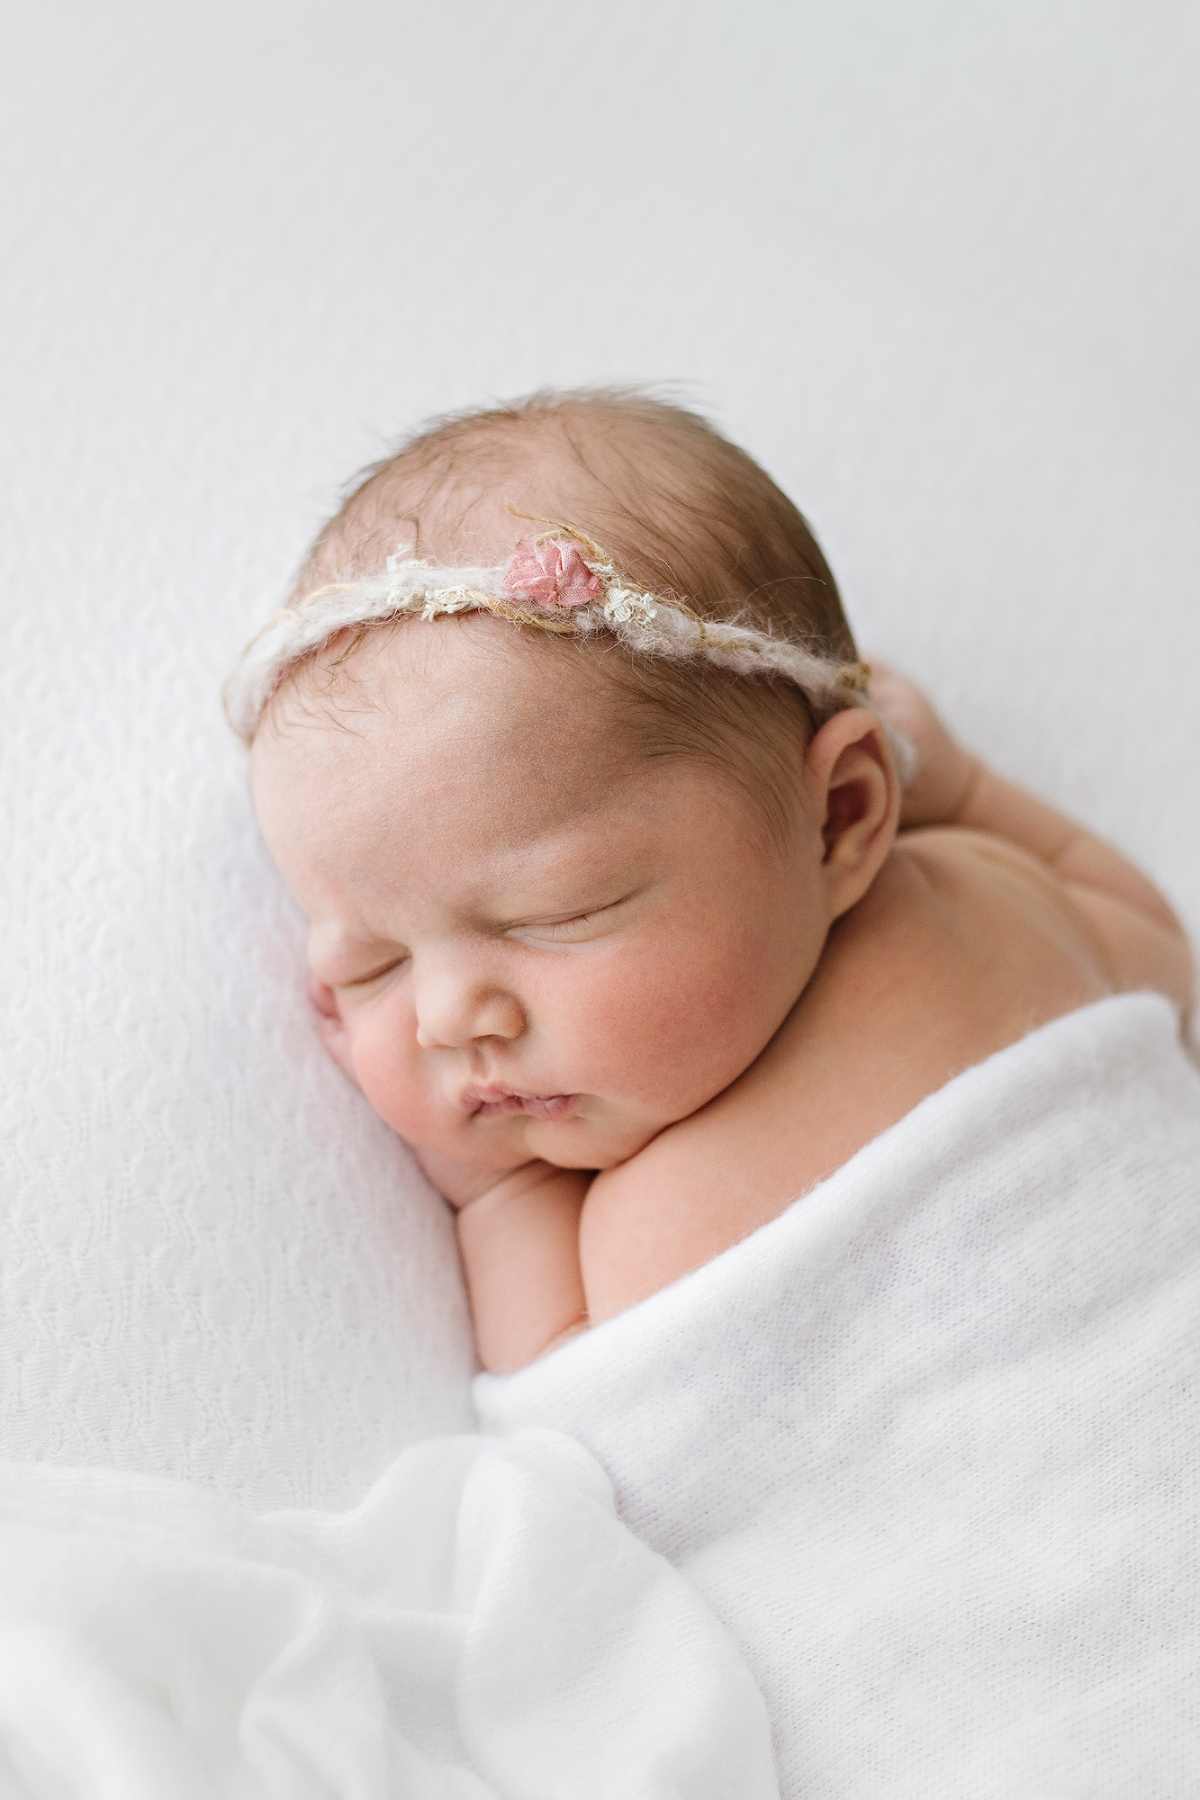 Newborn girl on a white blanket with a delicate flower headband - Kristy Notting Photography